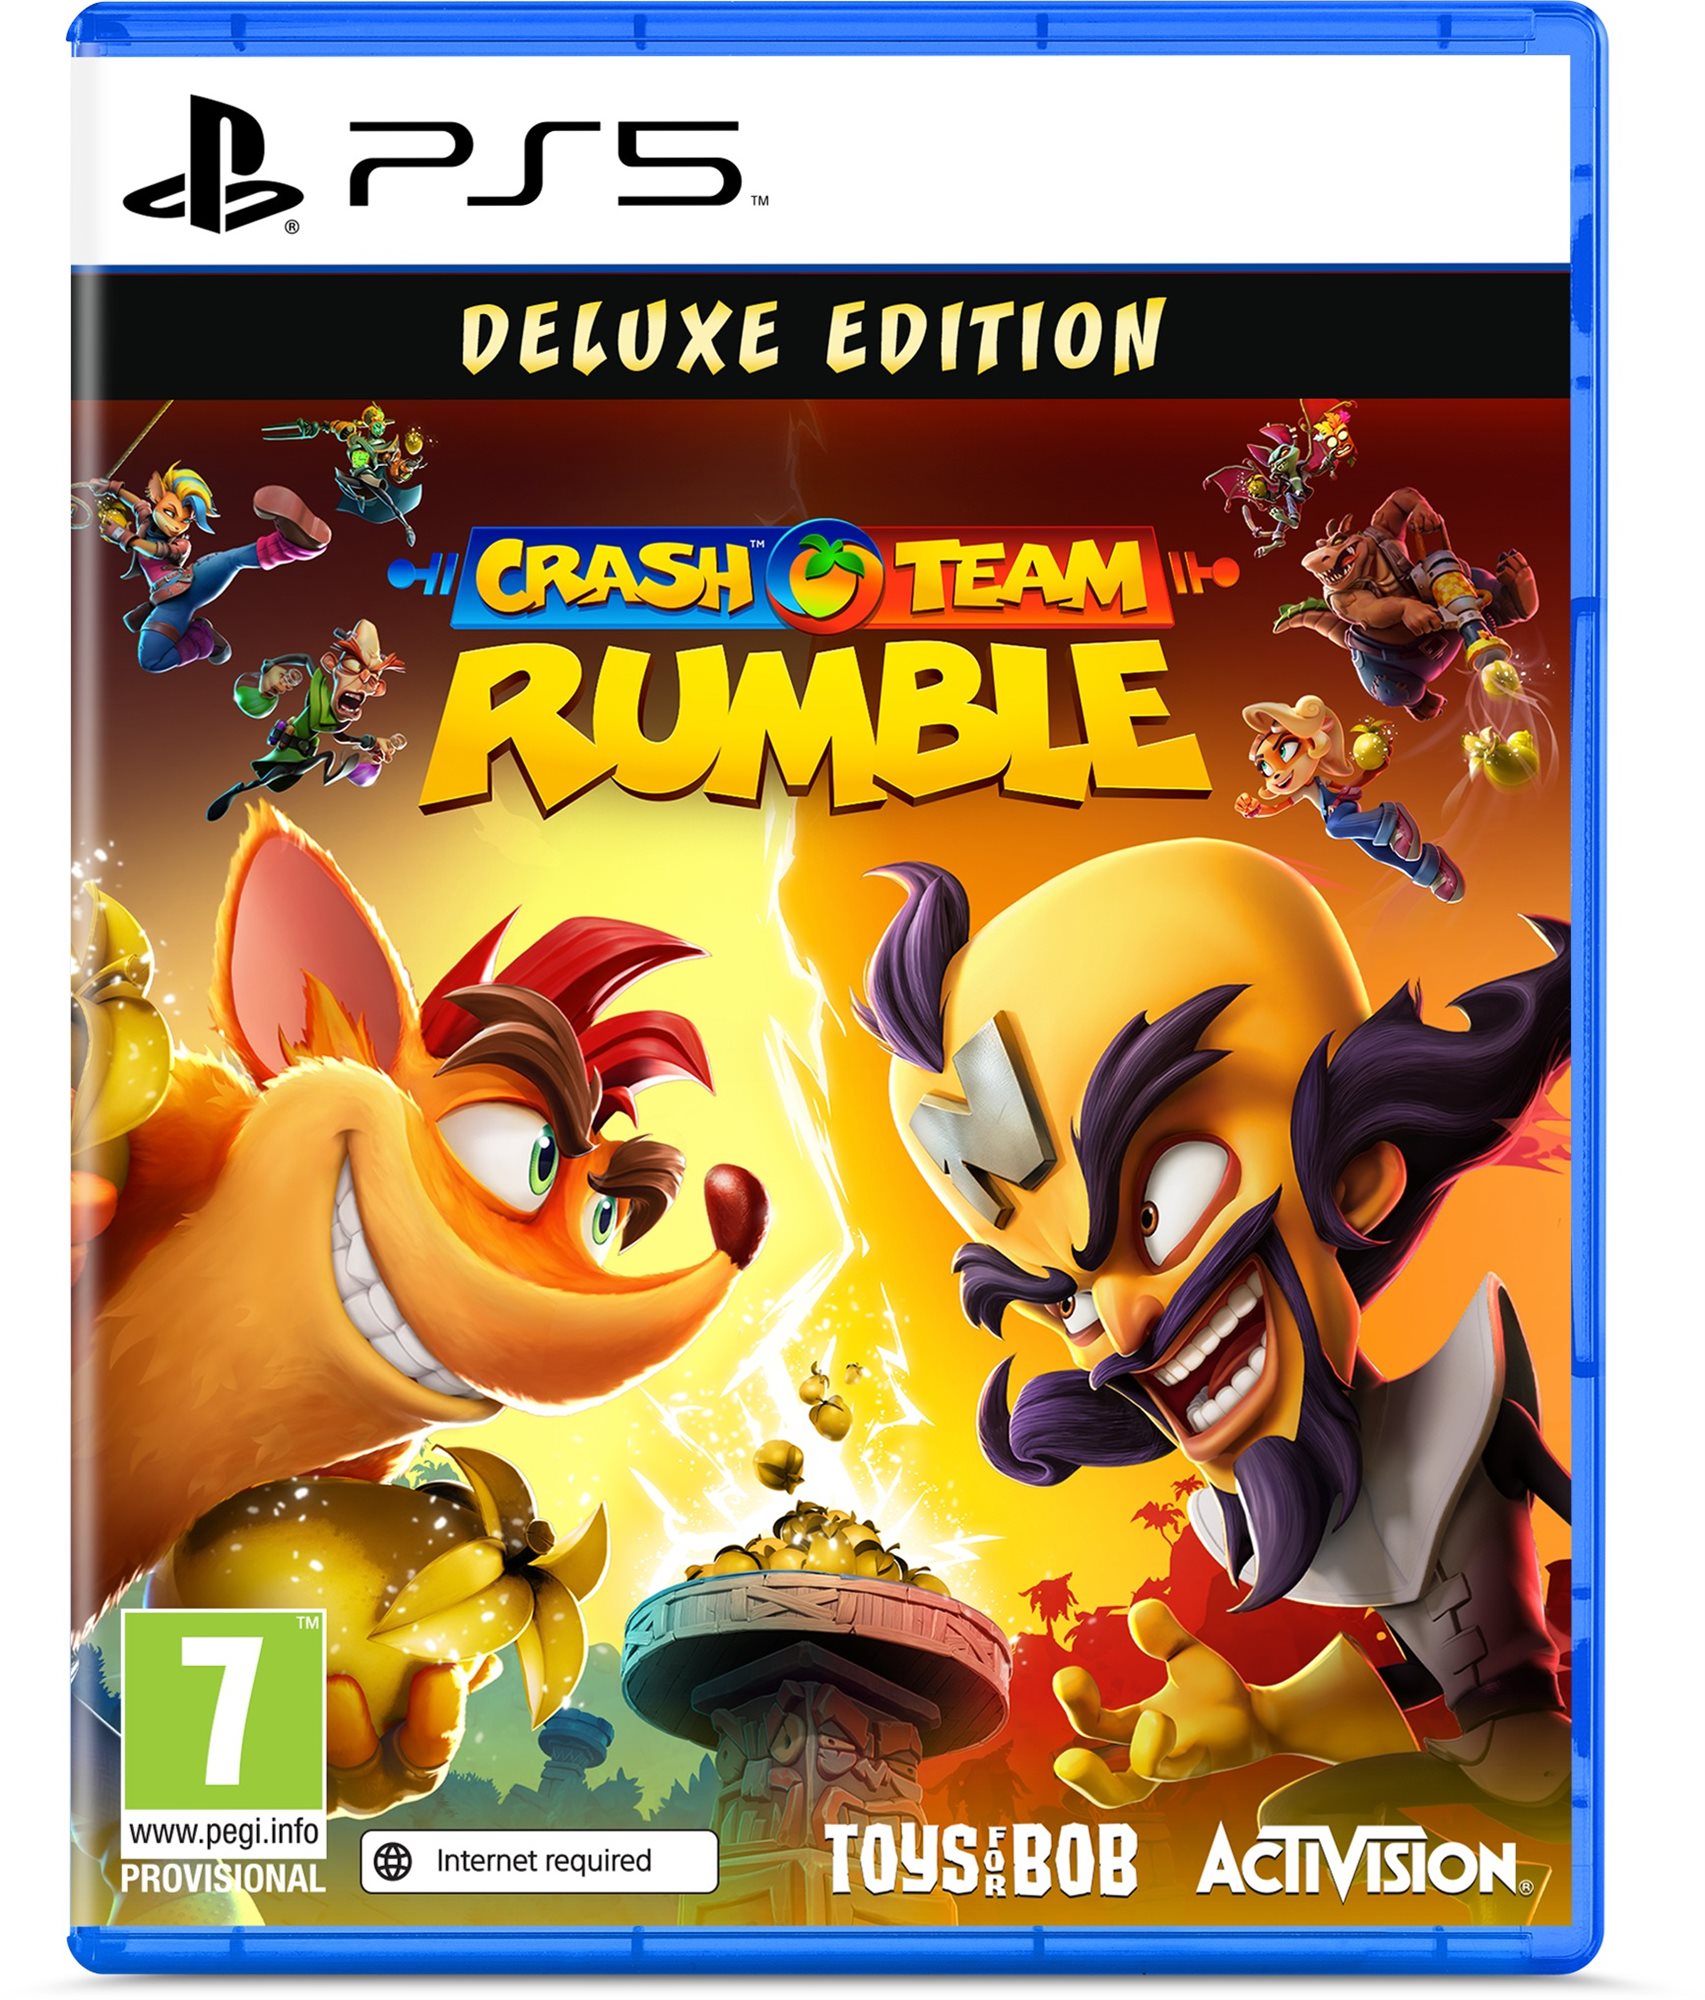 Crash Team Rumble: Deluxe Edition - PS5